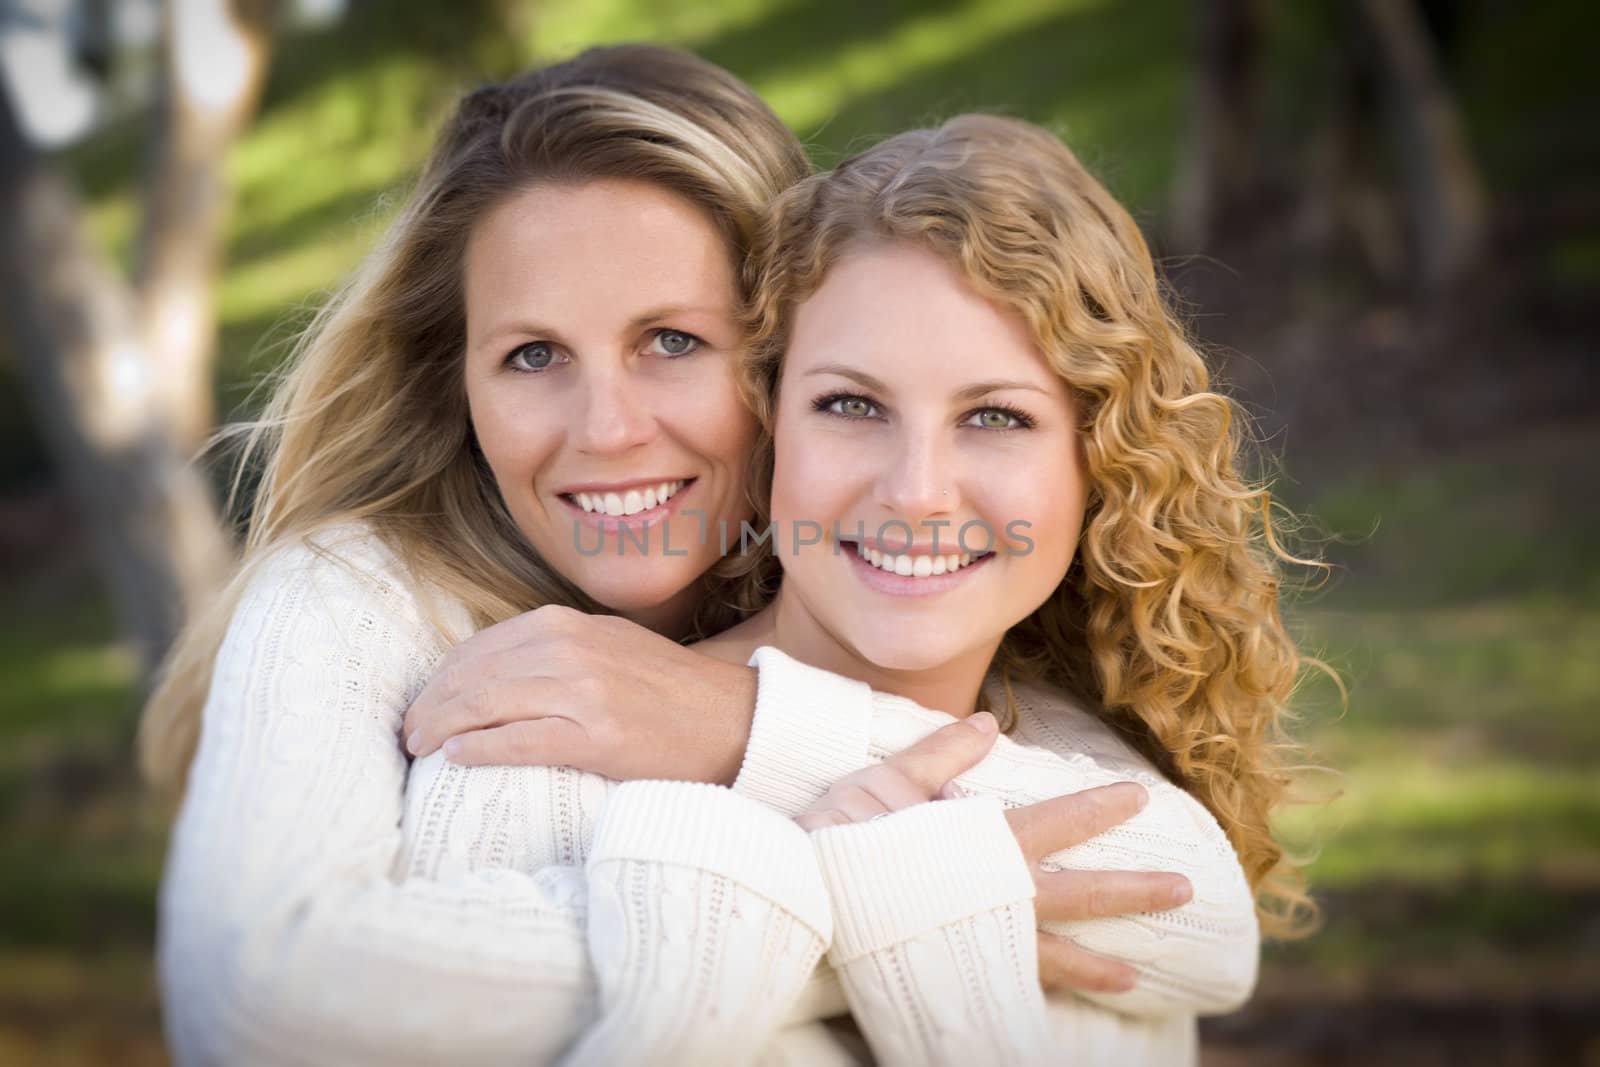 Pretty Mother and Daughter Portrait Hugging in the Park on a Fall Day.